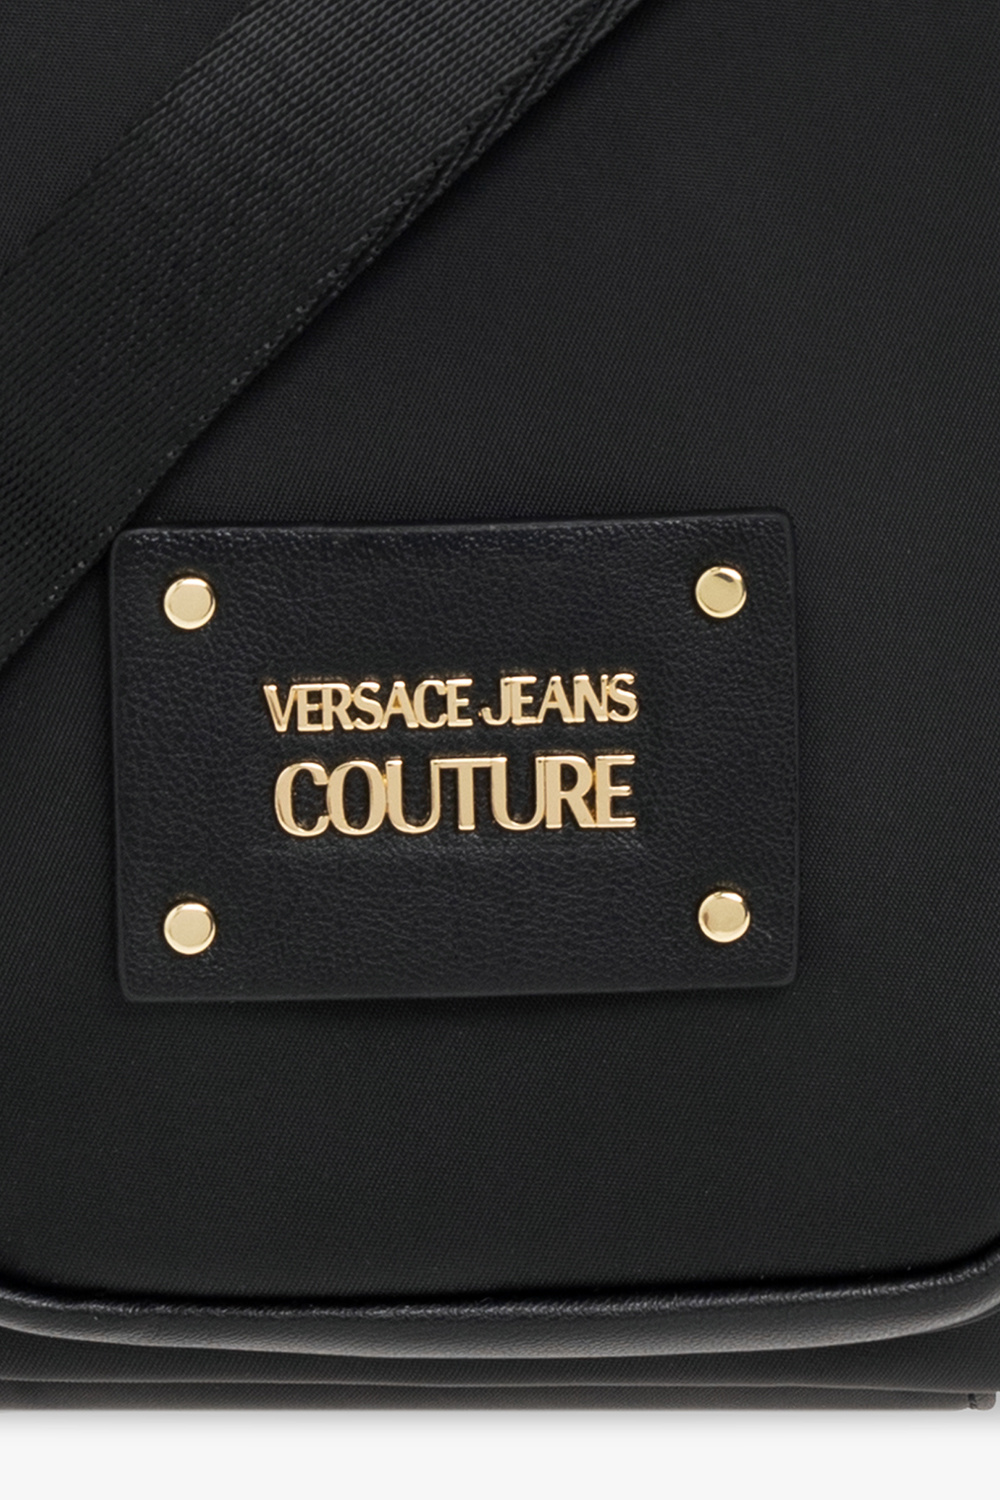 Versace Jeans Couture The Discovery Dress